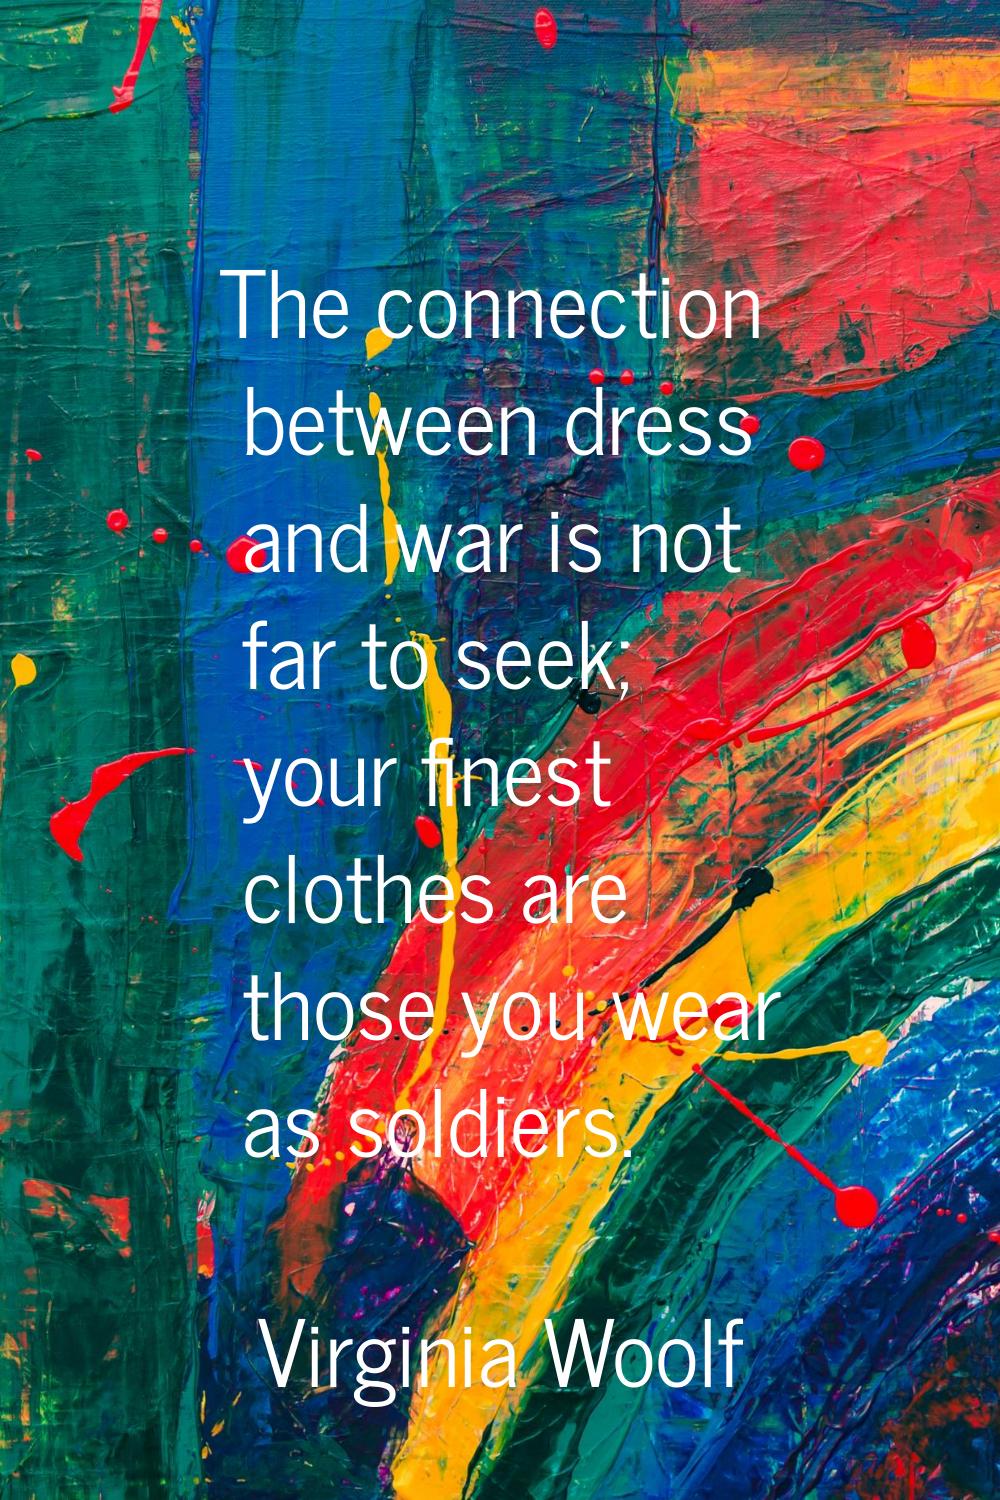 The connection between dress and war is not far to seek; your finest clothes are those you wear as 